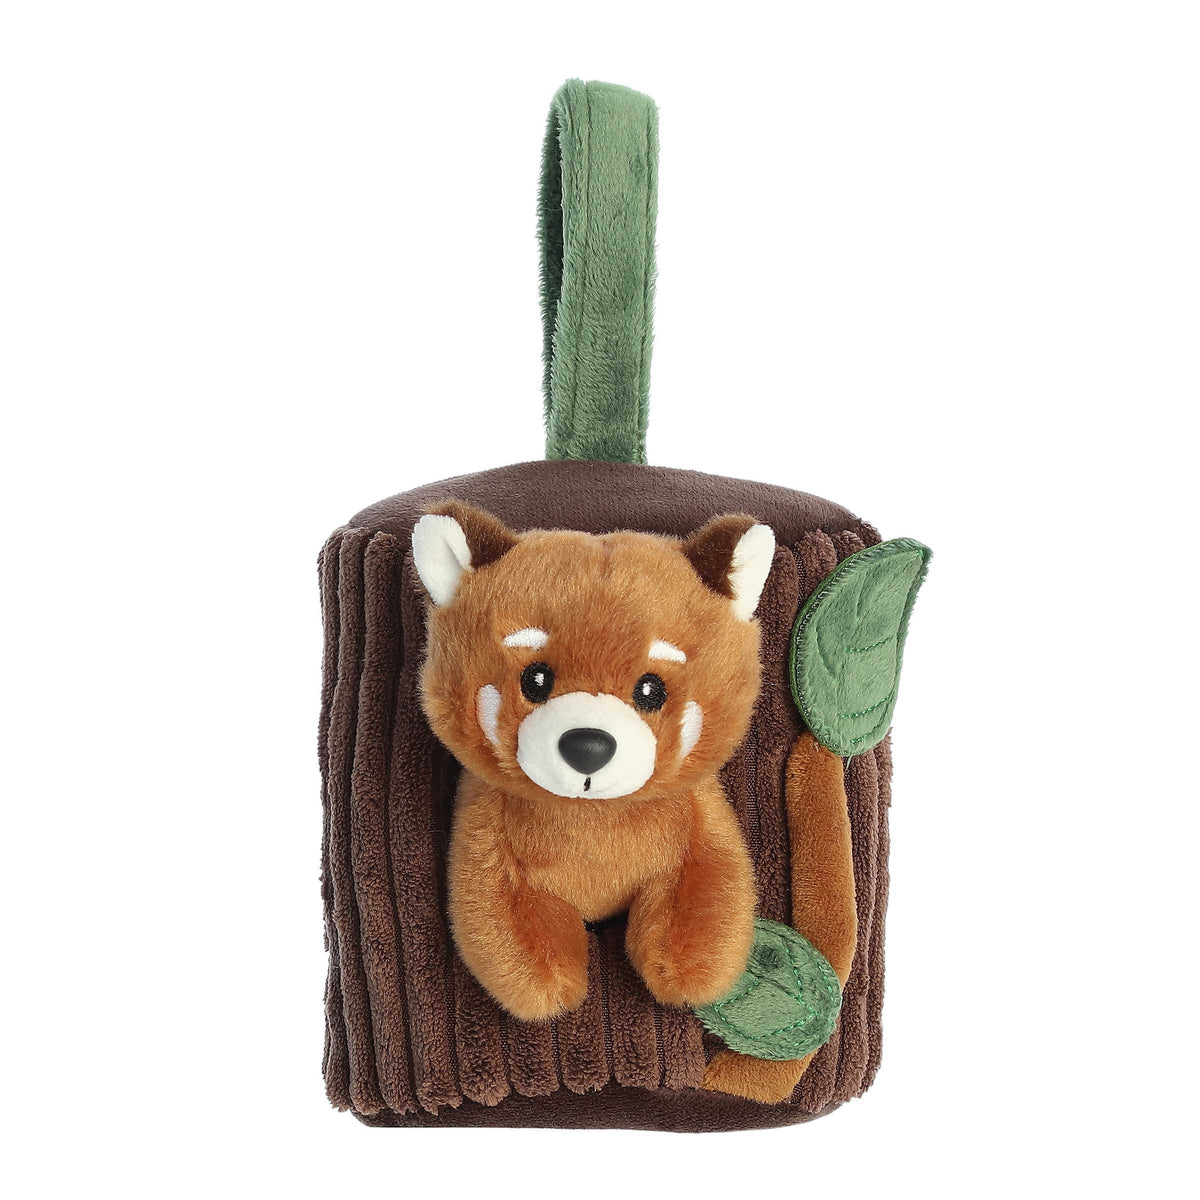 Red Panda plush and Tree Trunk from Hideouts, offering cozy, playful learning about nature and conservation.